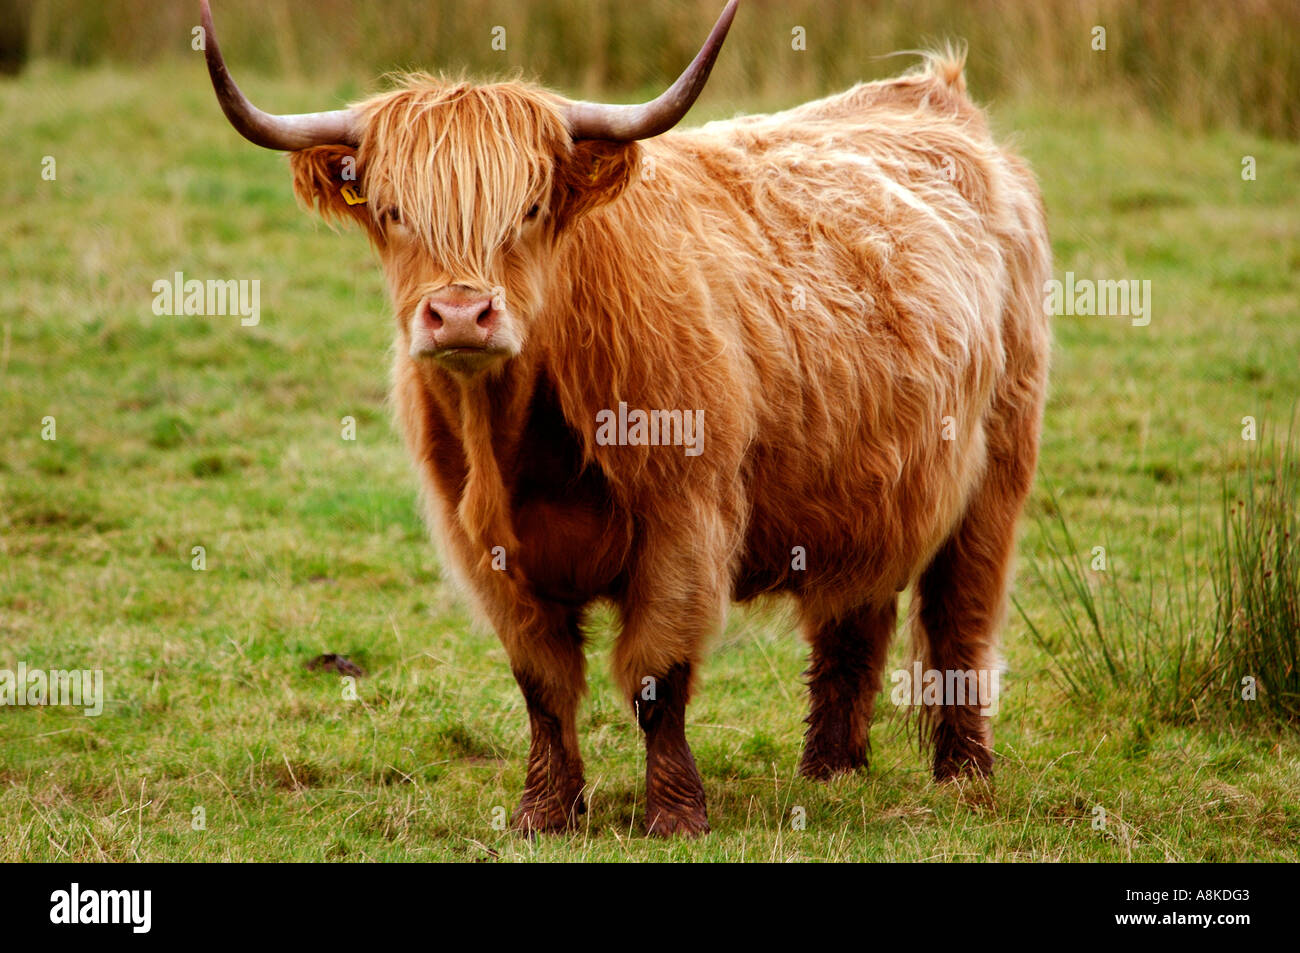 Nice sharp highly saturated portrait of a ginger Highland Cow typical of the Scottish cattle breeds Stock Photo